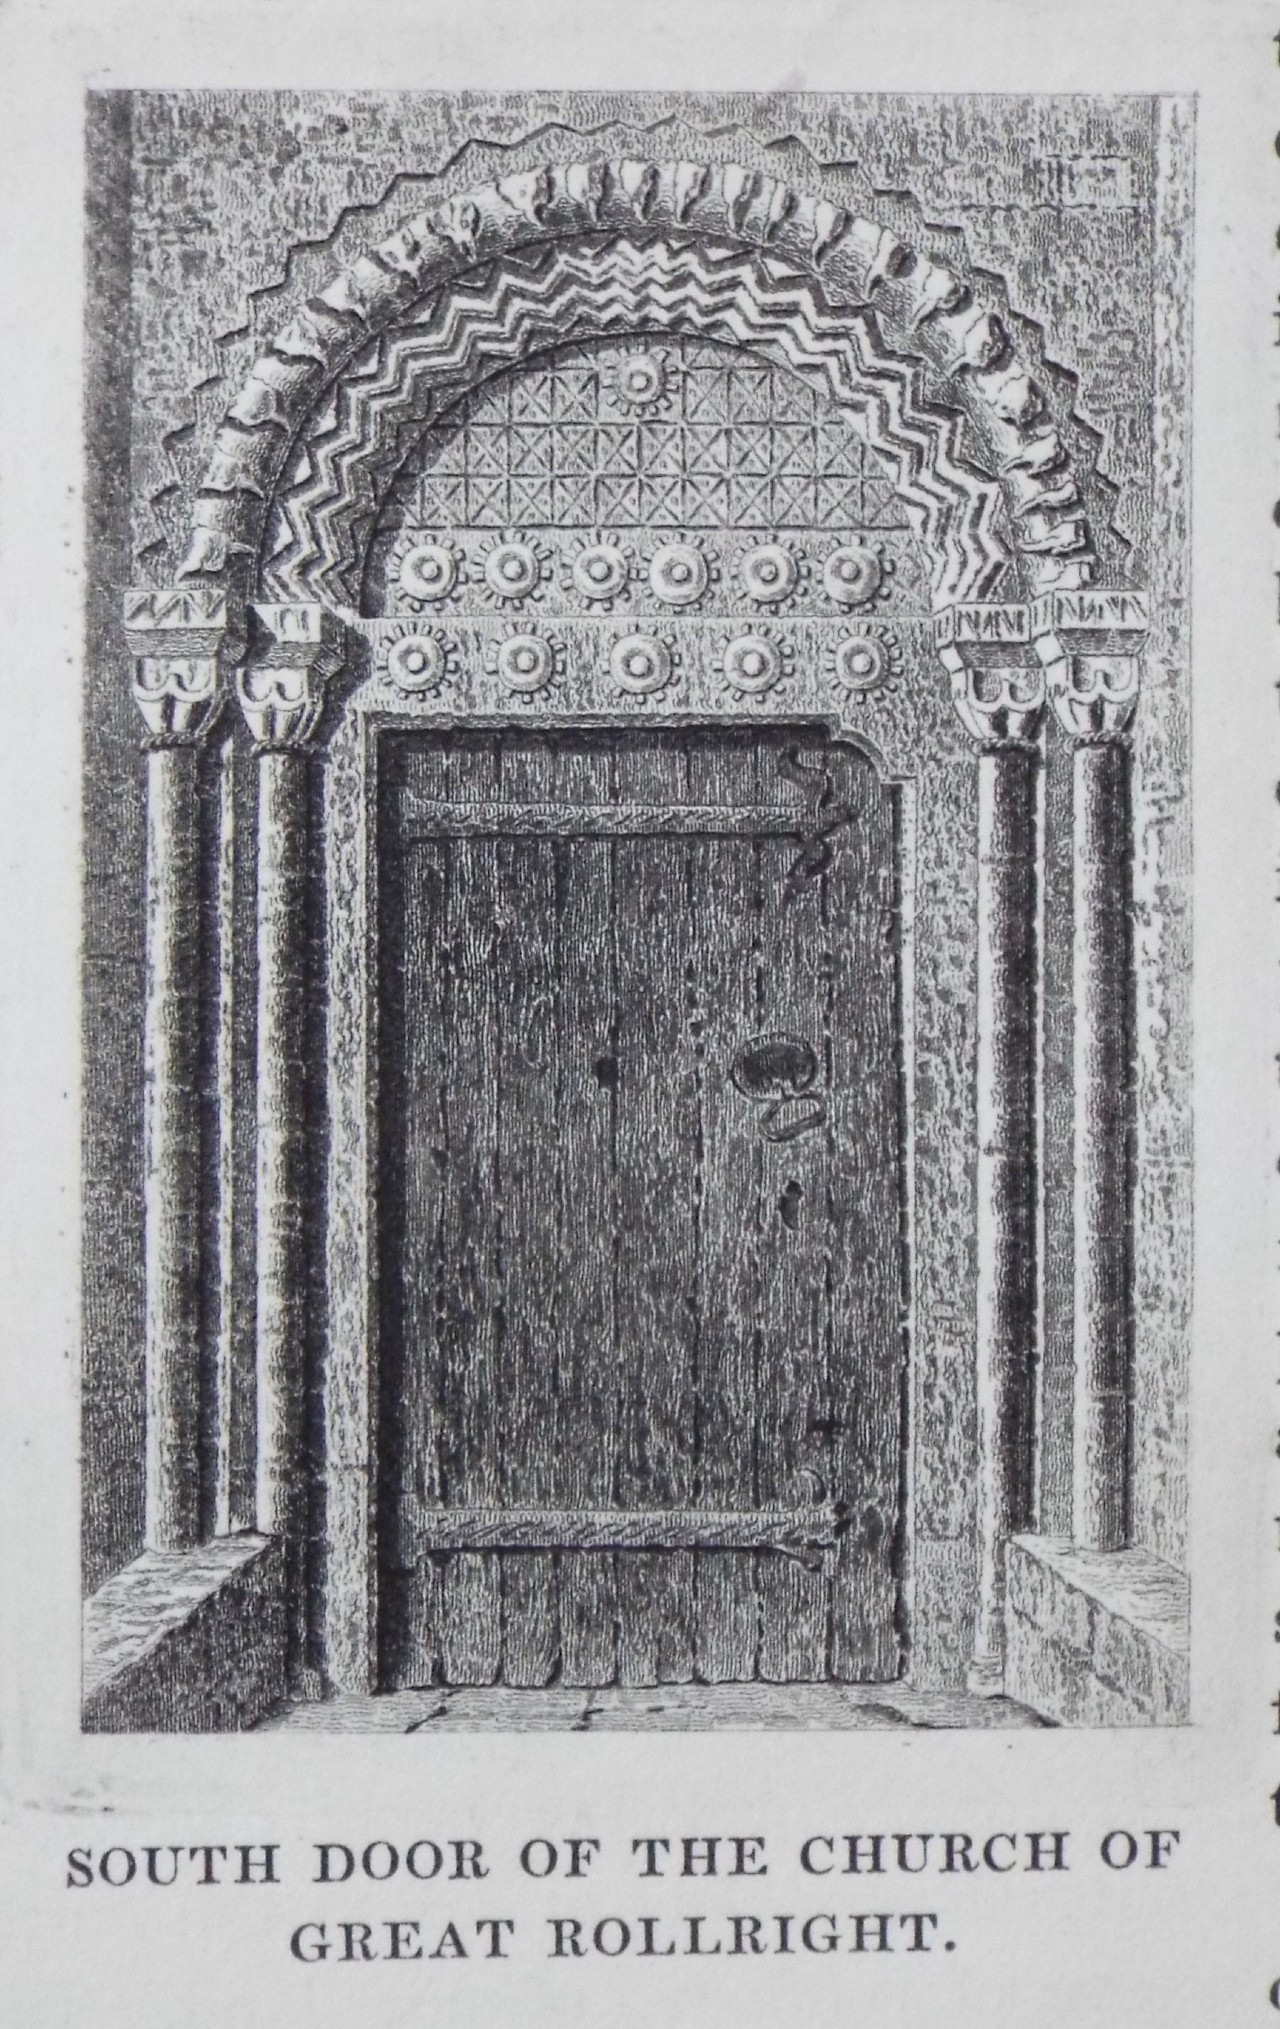 Print - South Door of the Church of Great Rollright.